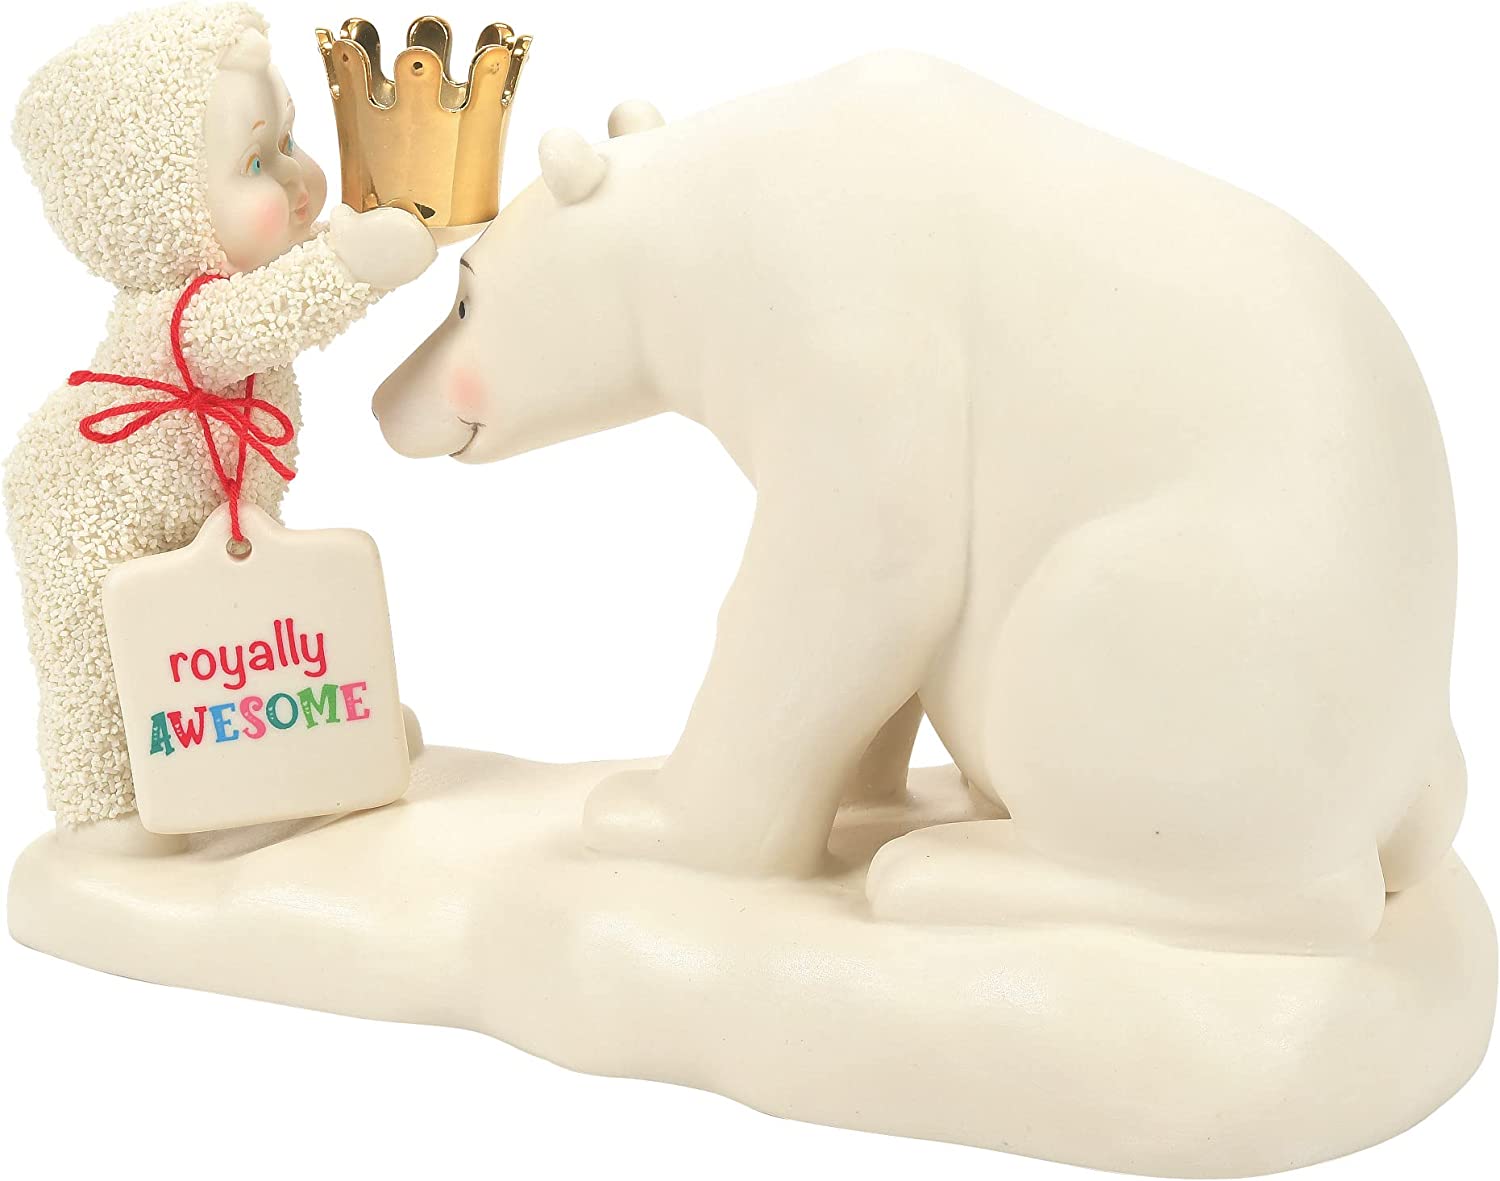 Department 56 Snowbabies Royally Awesome Bear Figurine